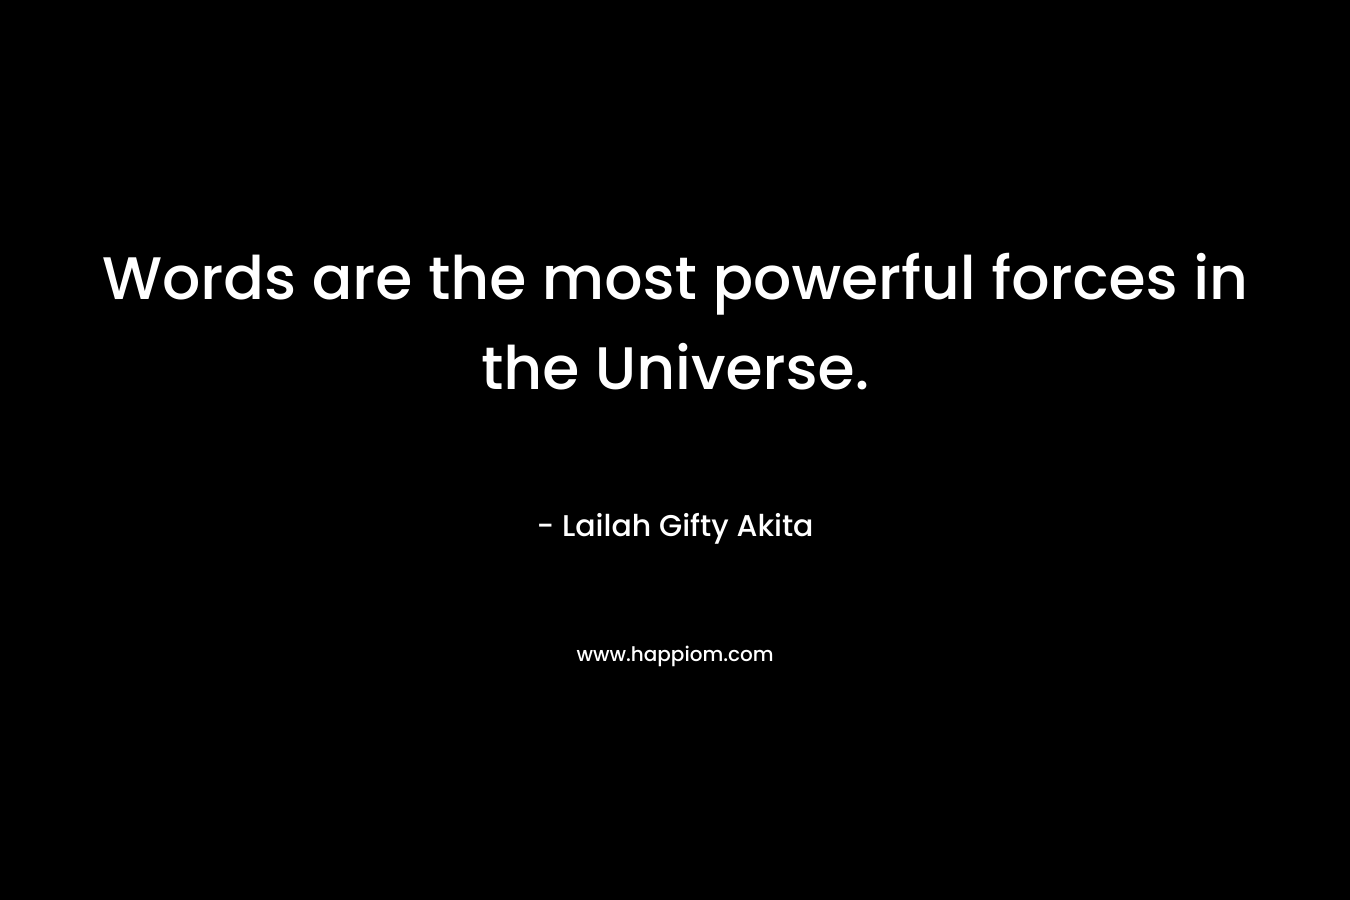 Words are the most powerful forces in the Universe.